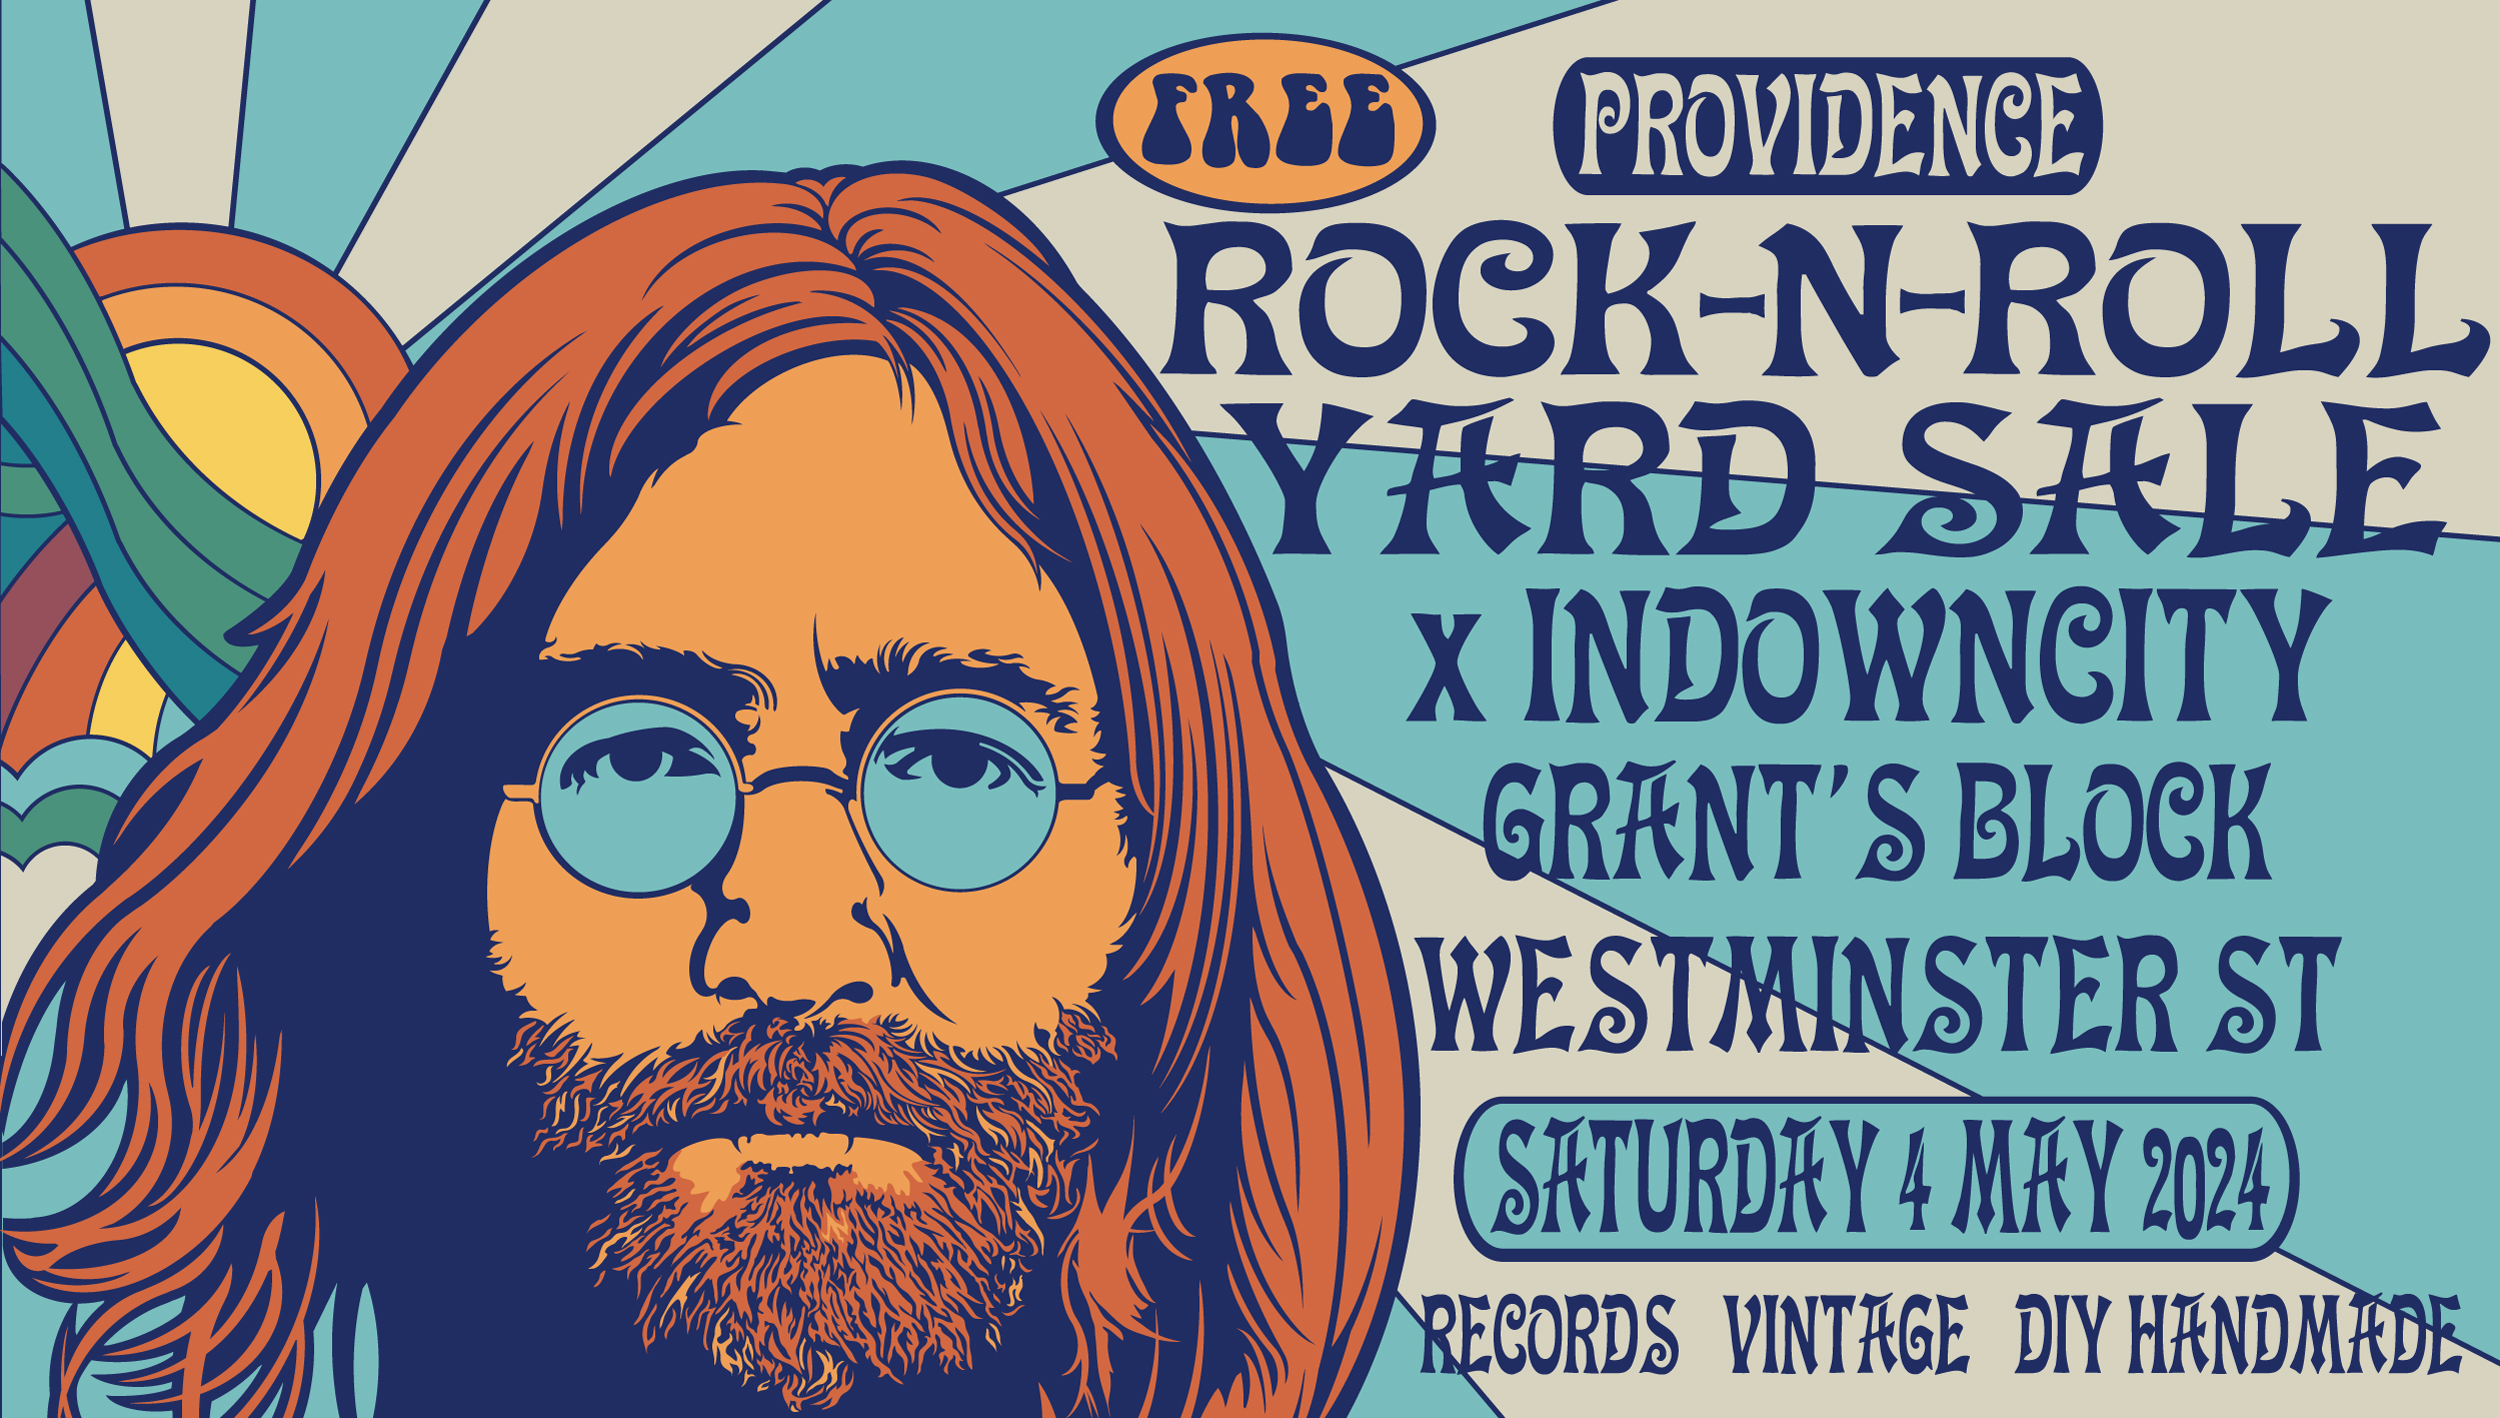 the 2024 providence rock and roll yard sale image of john lennon by swamp yankee pete macphee